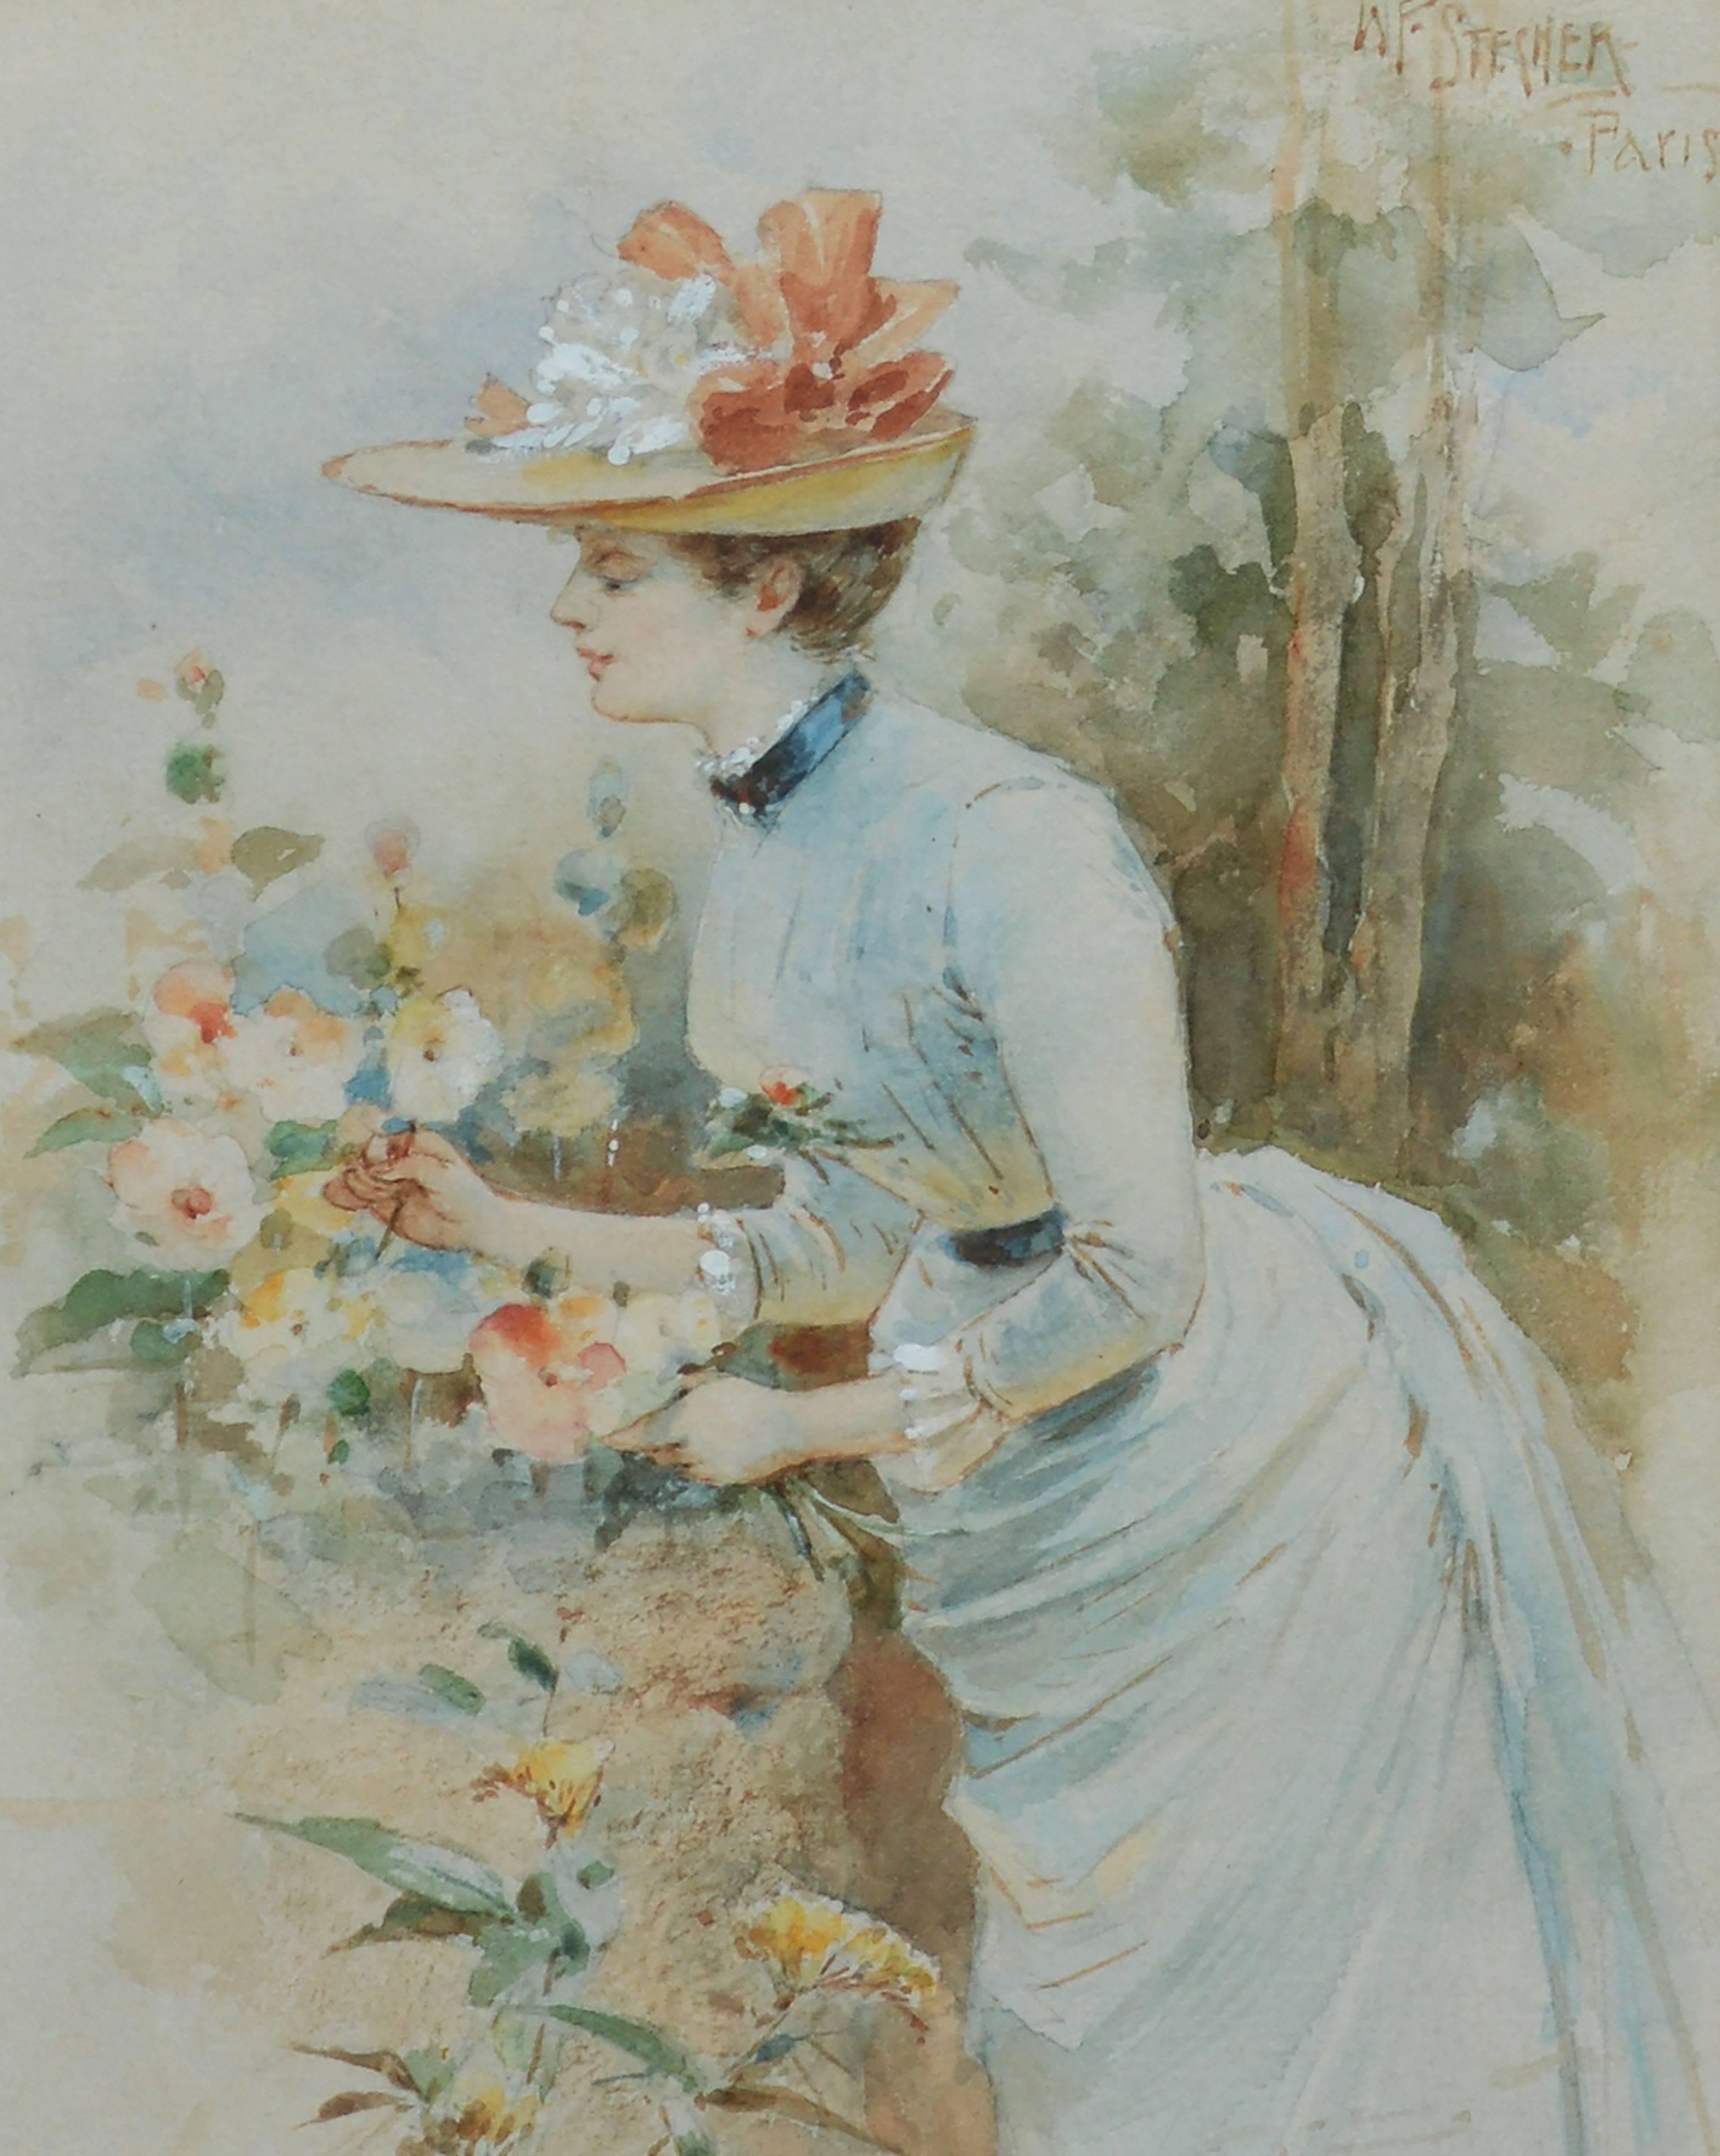 Impressionist painting of a young woman picking flowers by William Frederick Stecher (1864-1940).  Watercolor and gouache on paper, circa 1890.  Signed upper right, 